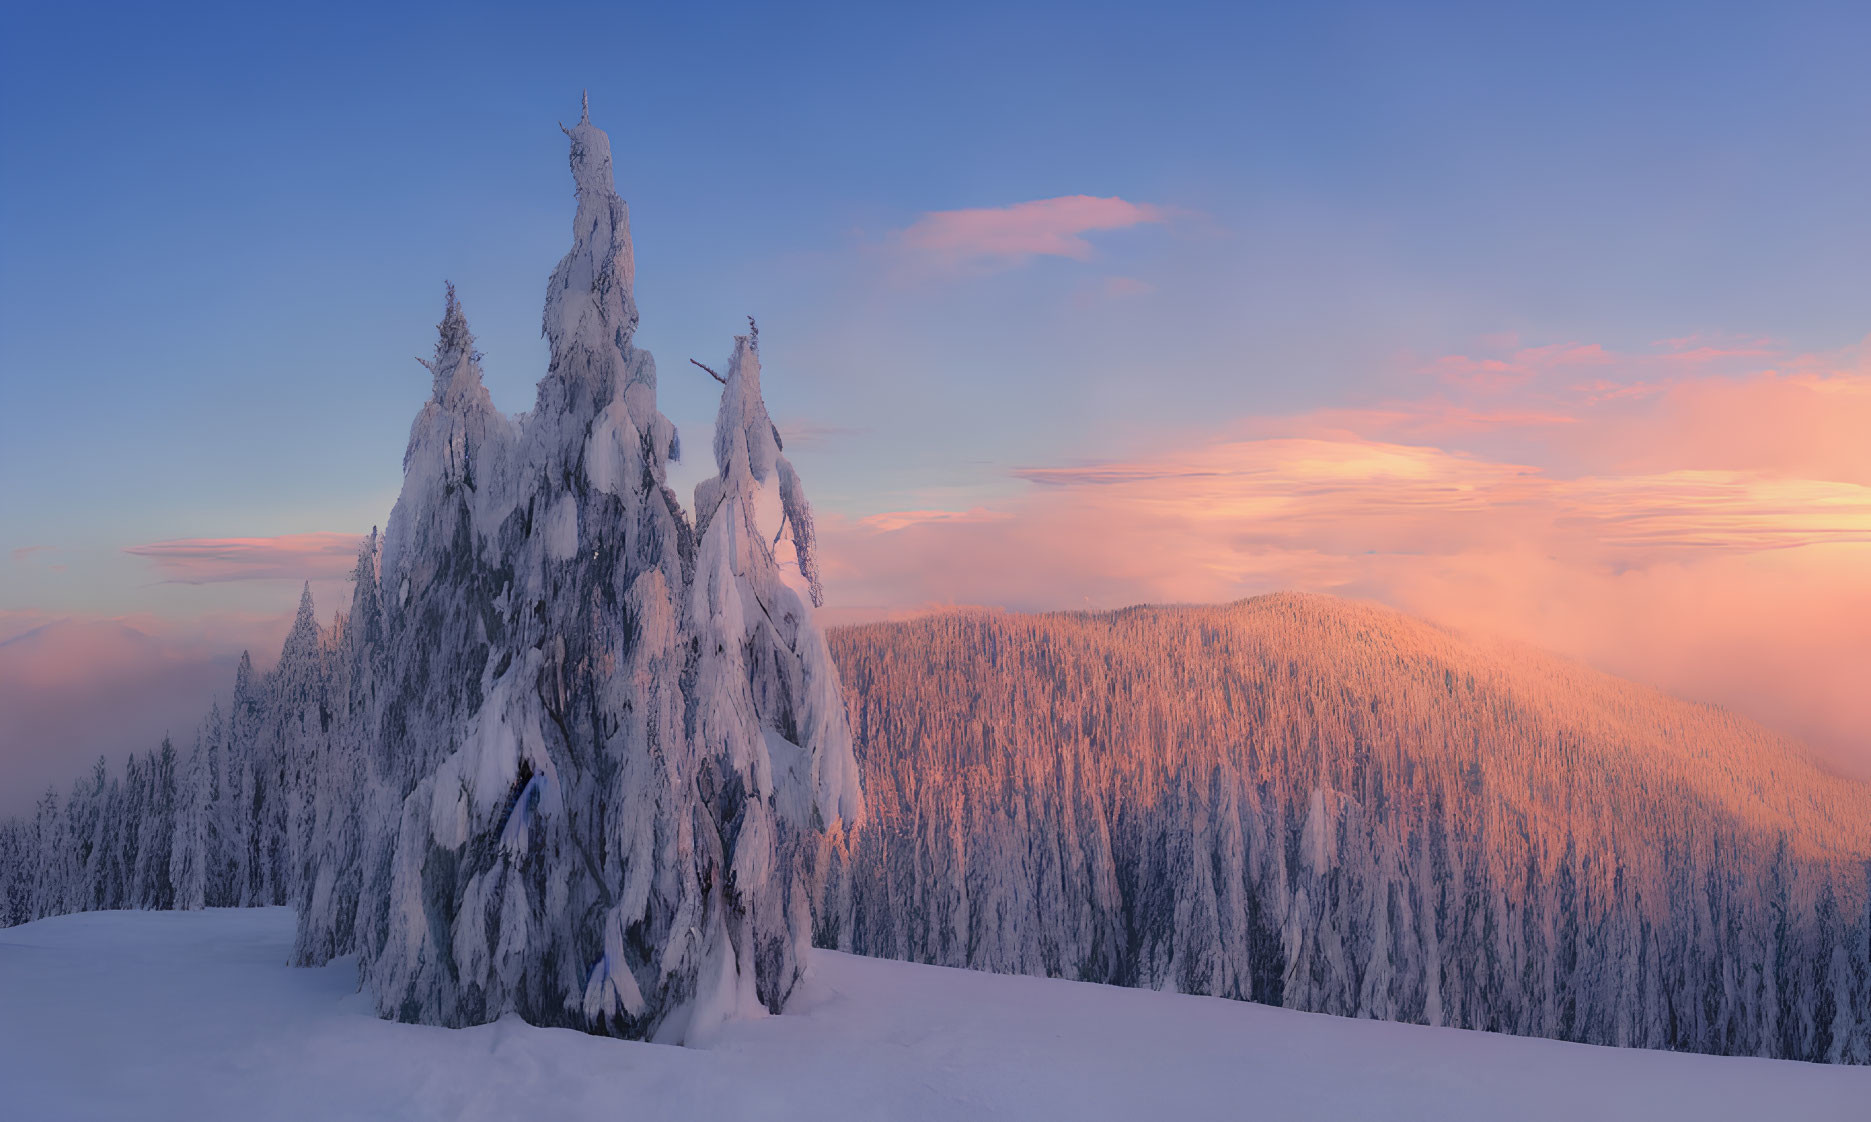 Winter sunset scene: snow-covered trees, pink clouds, frosty mountain forest.